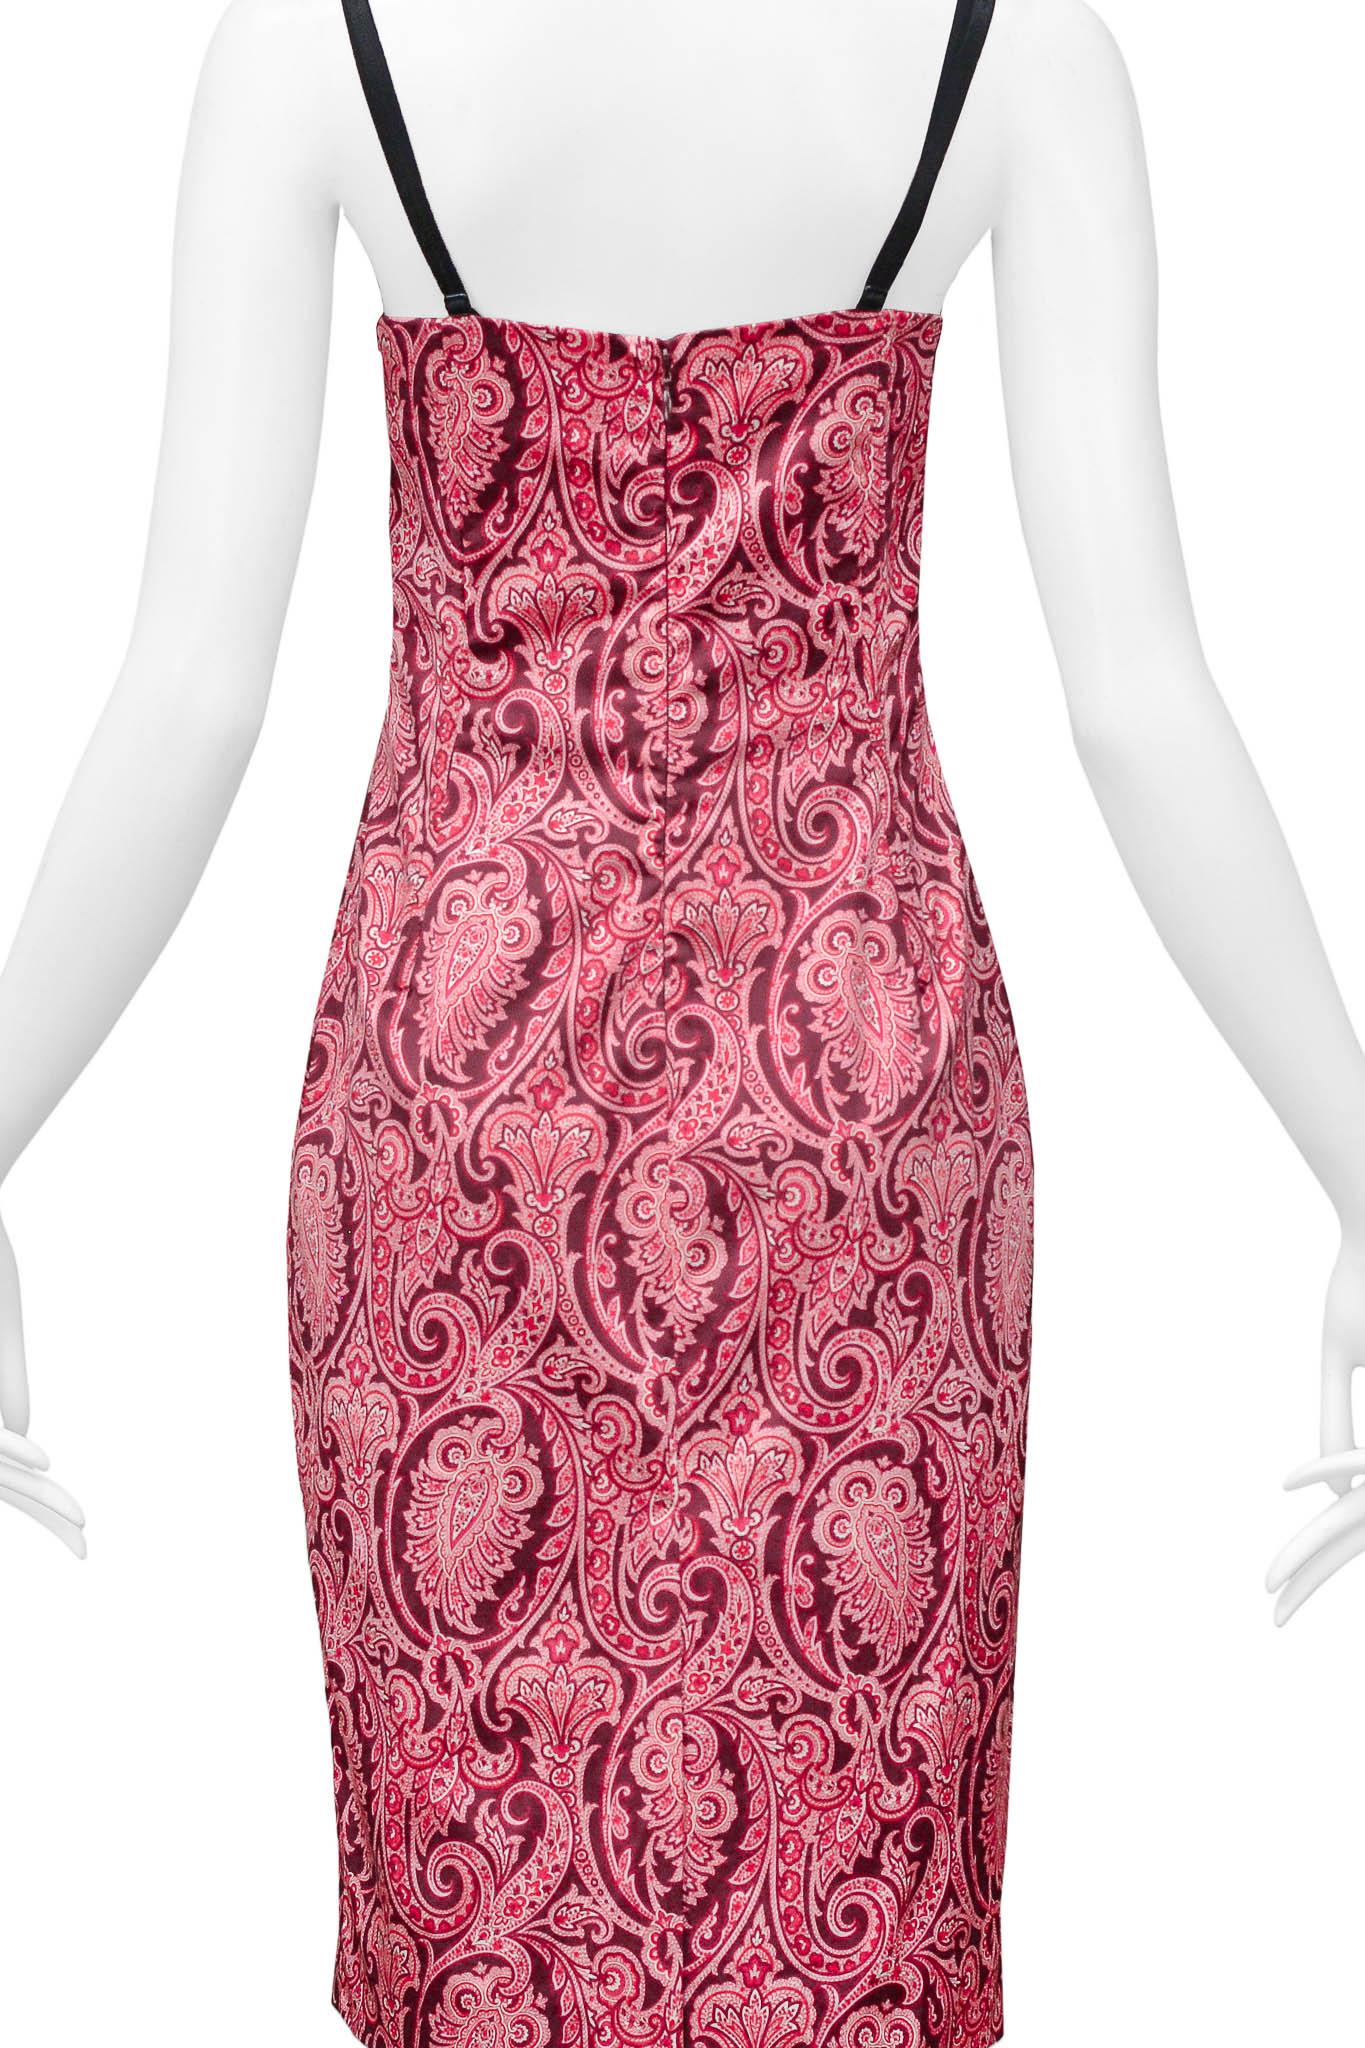 Dolce & Gabbana Pink Paisley Body-Con Dress For Sale 2